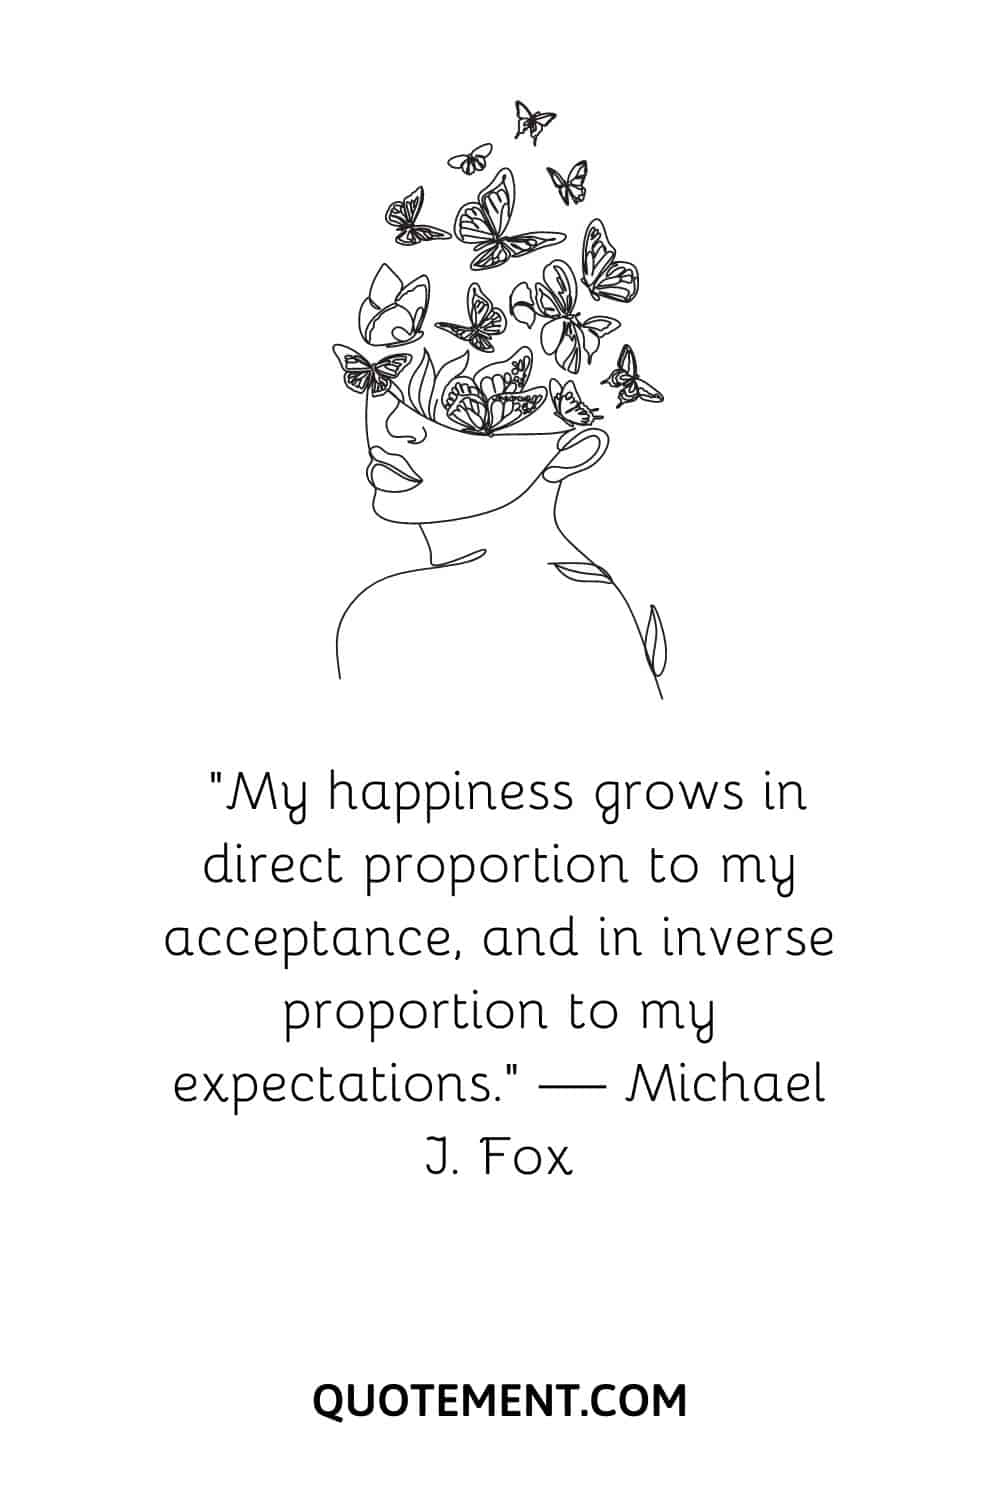 “My happiness grows in direct proportion to my acceptance, and in inverse proportion to my expectations.” — Michael J. Fox